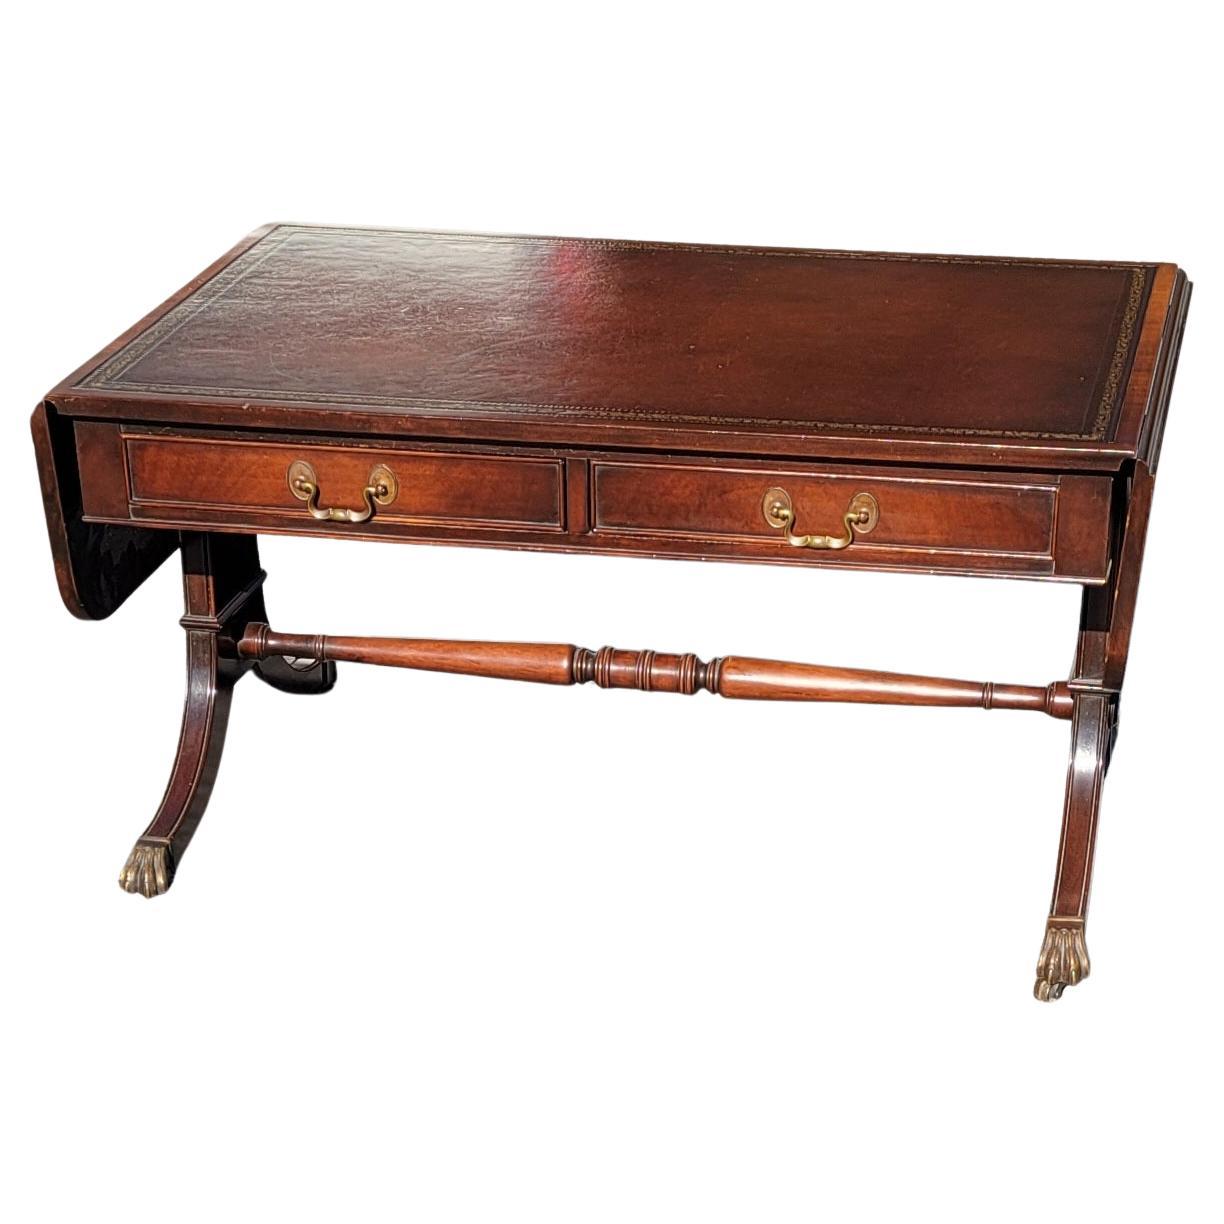 George III Style Mahogany and Leather Top Inset Drop Leaf Coffee Table on Wheels 2